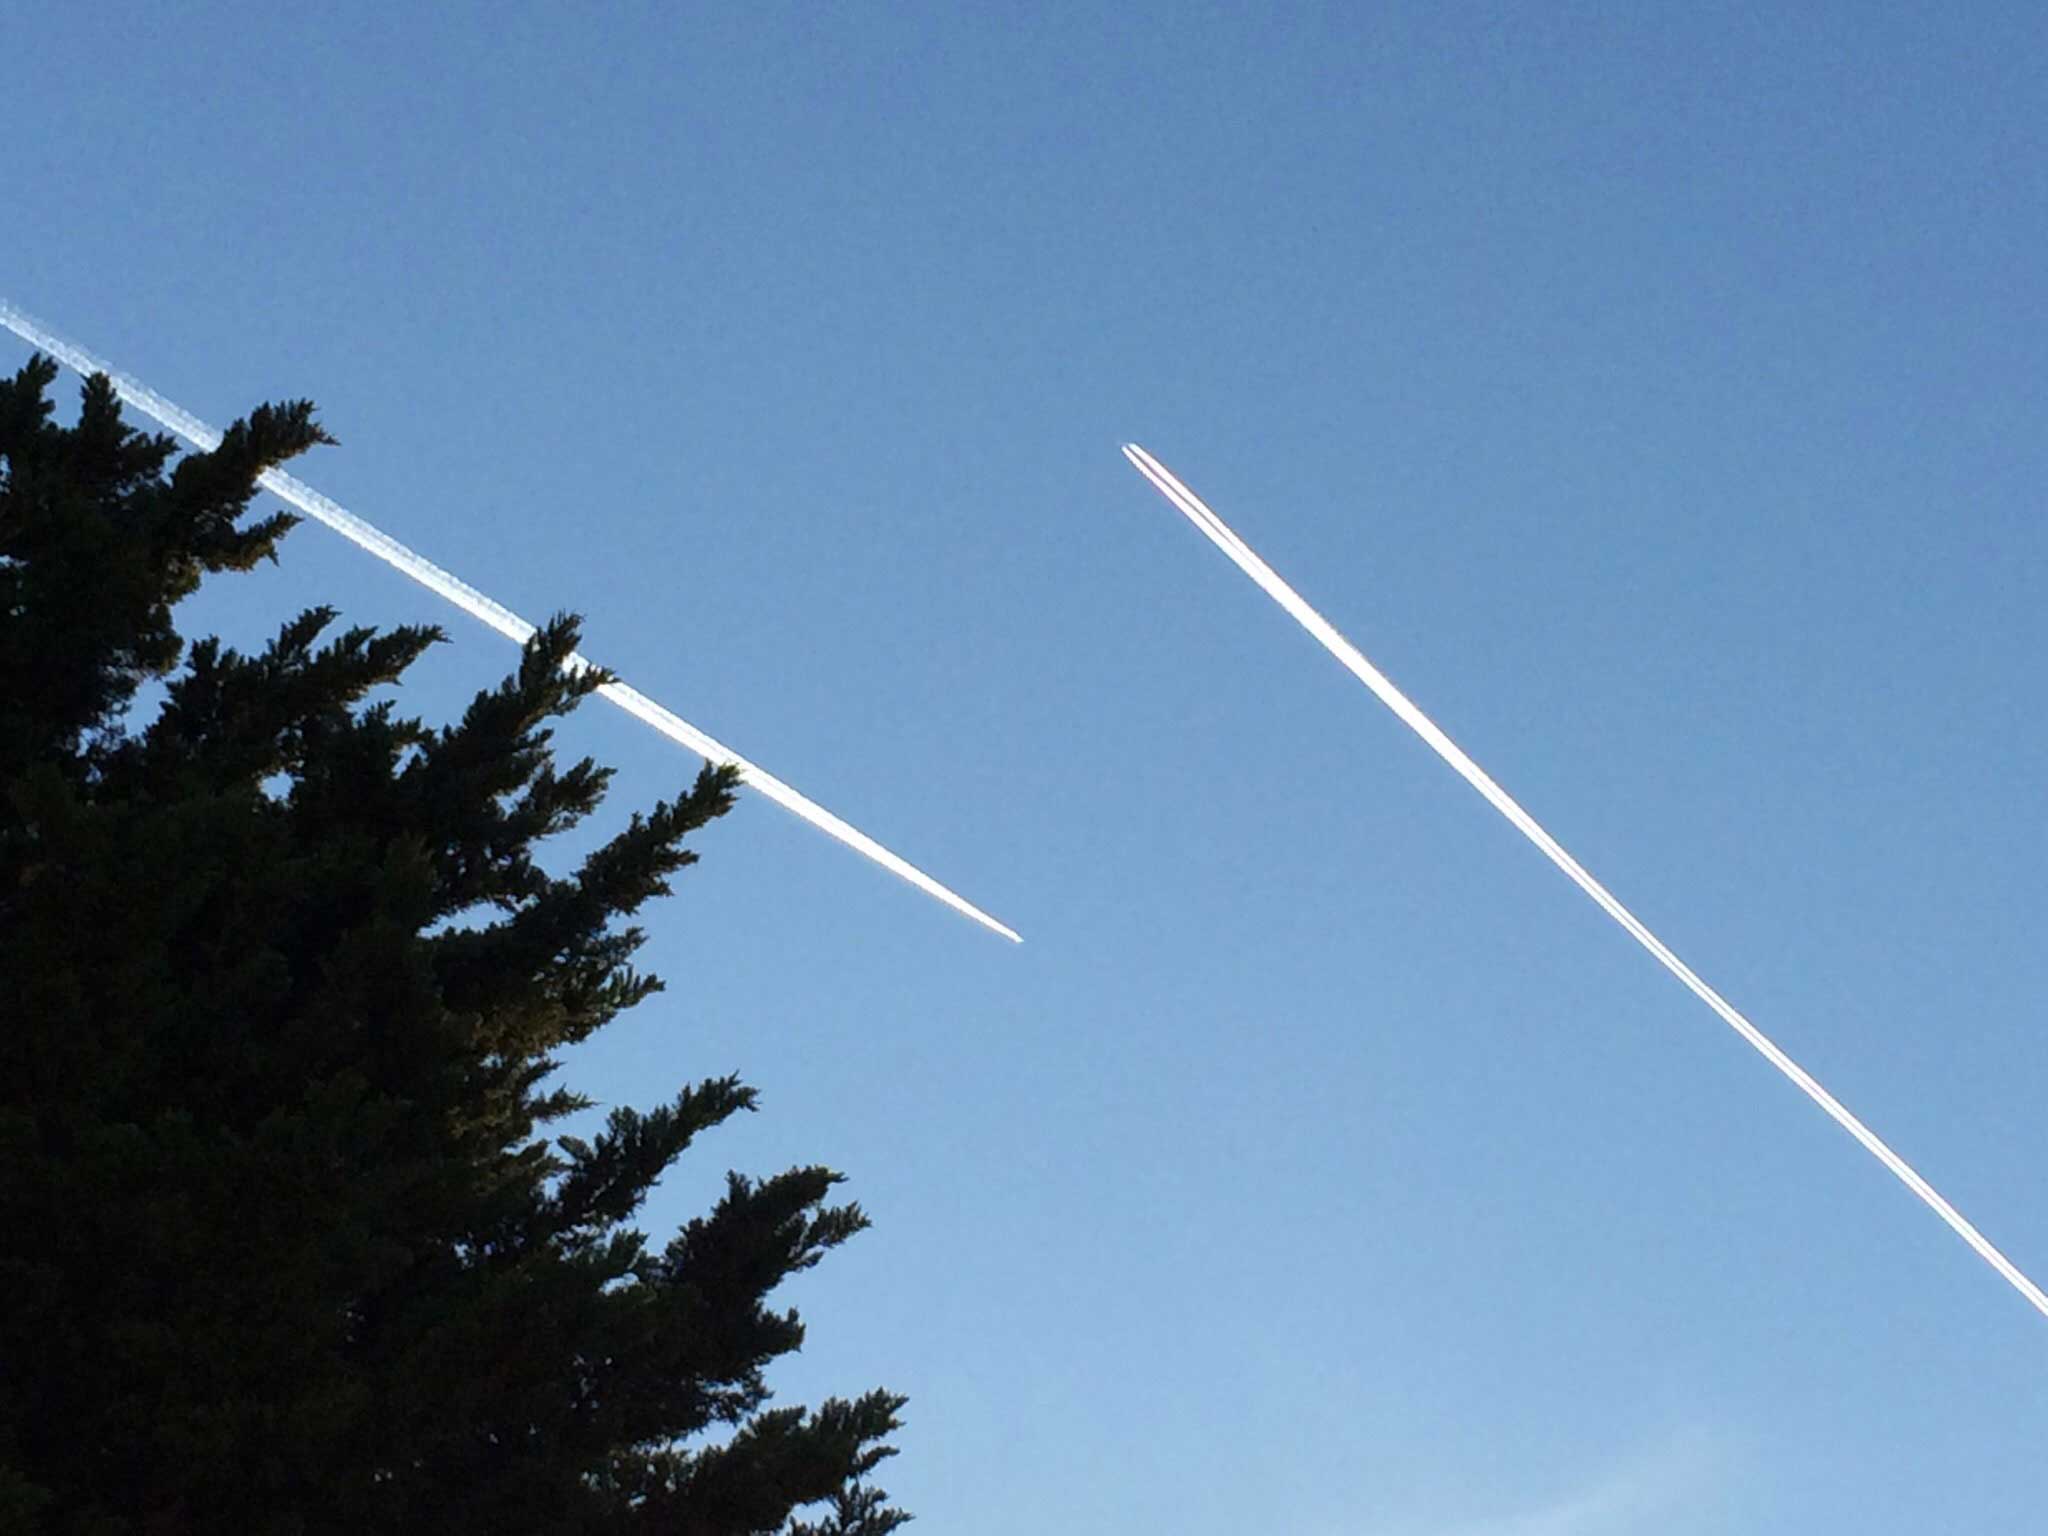 Two planes crossing in the sky